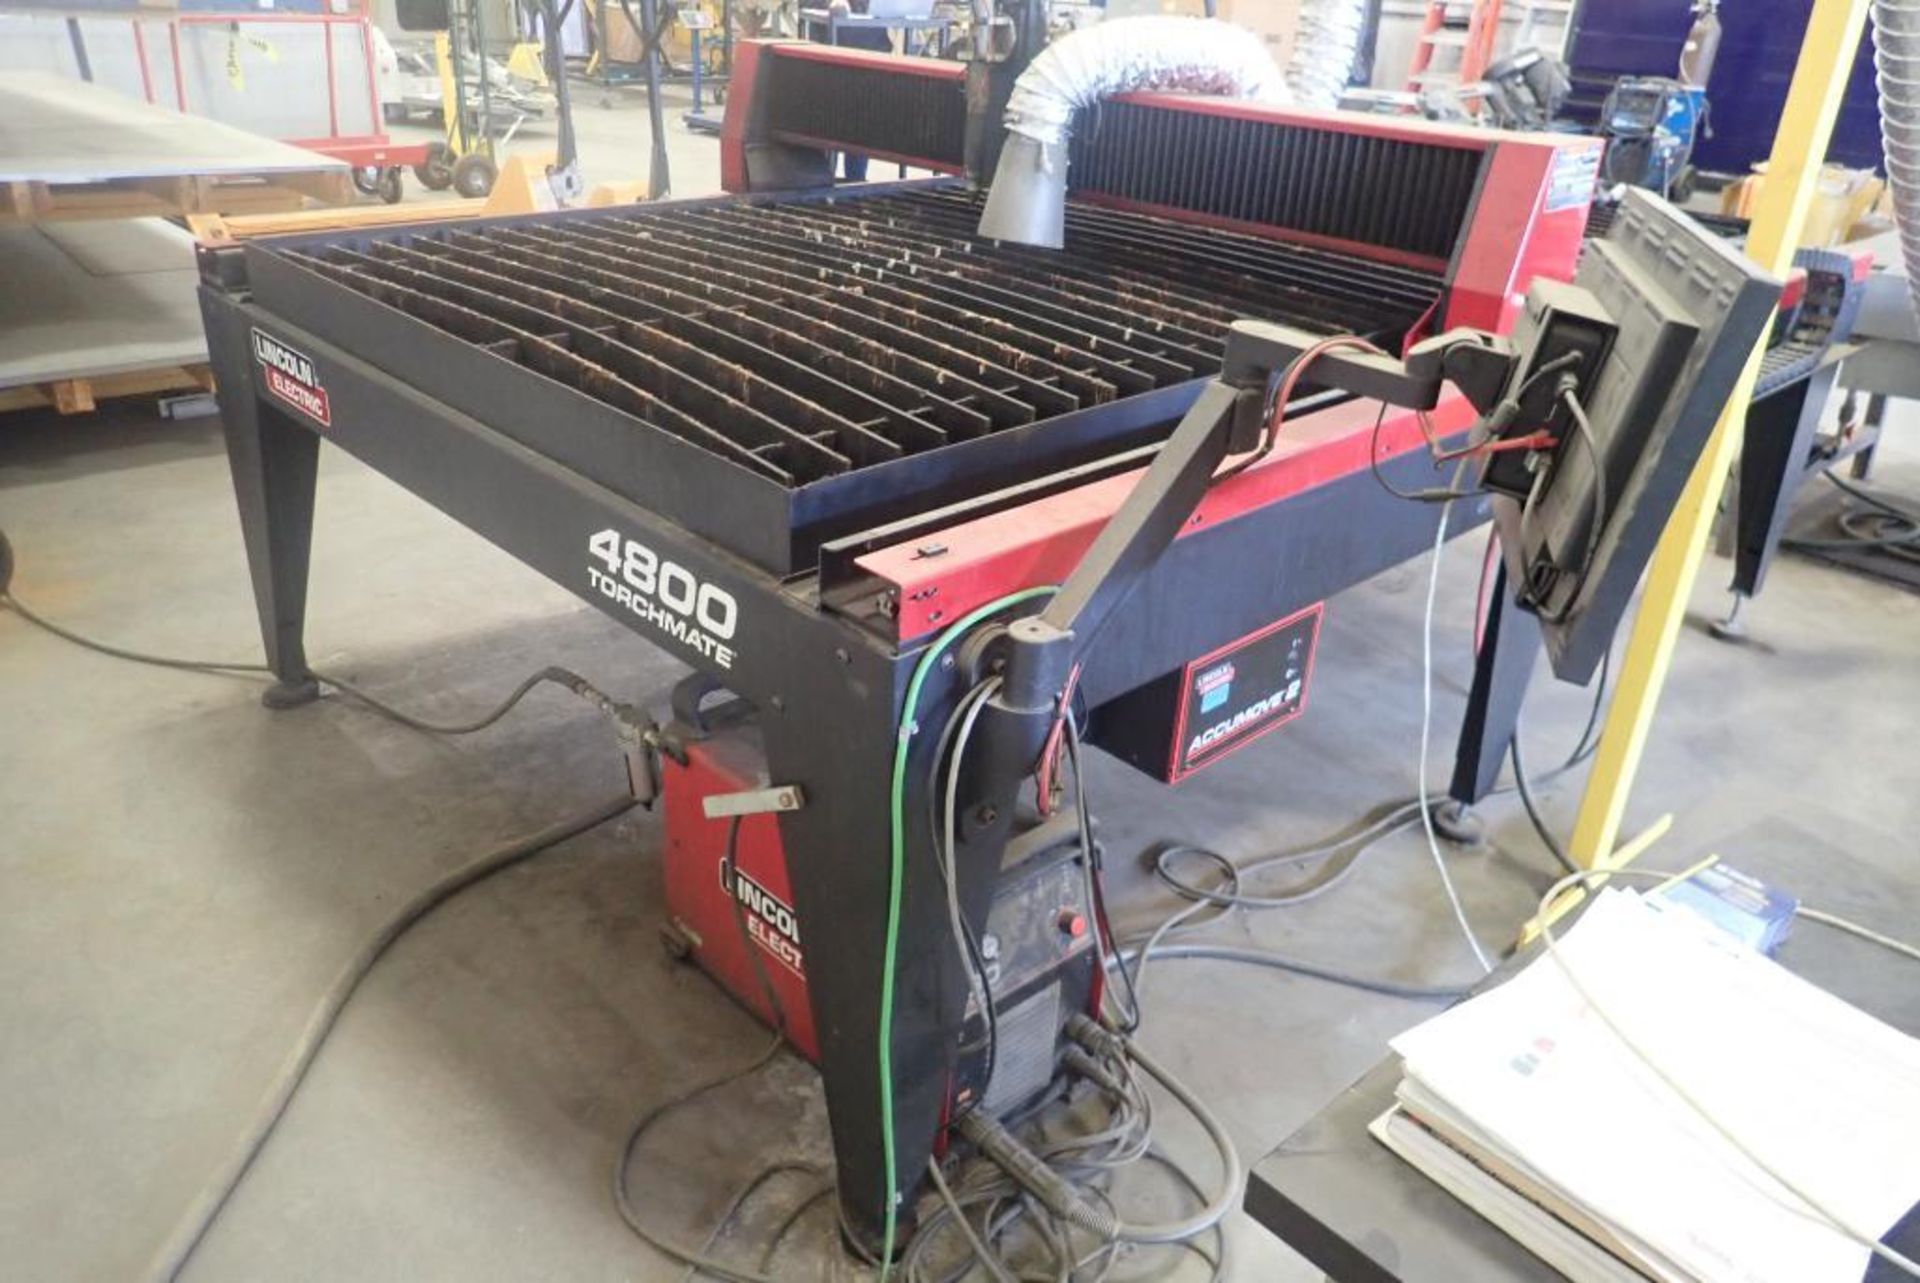 2017 Lincoln Electric 4800 Torchmate 4'x8' CNC Plasma Cutting Table. SN 4800-17-344. - Image 2 of 15